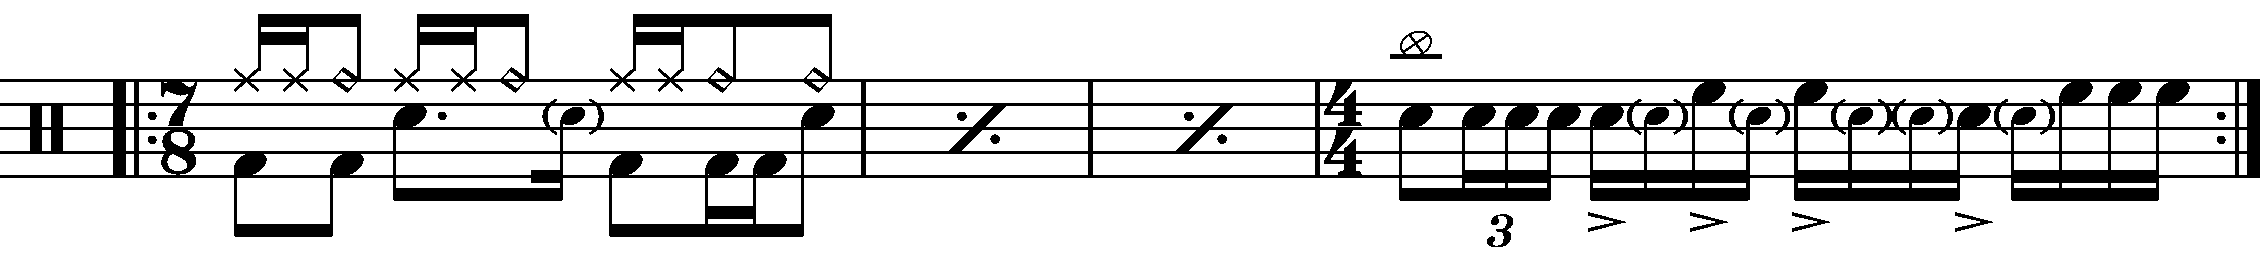 A four bar phrase using simple time 7/8 and 4/4